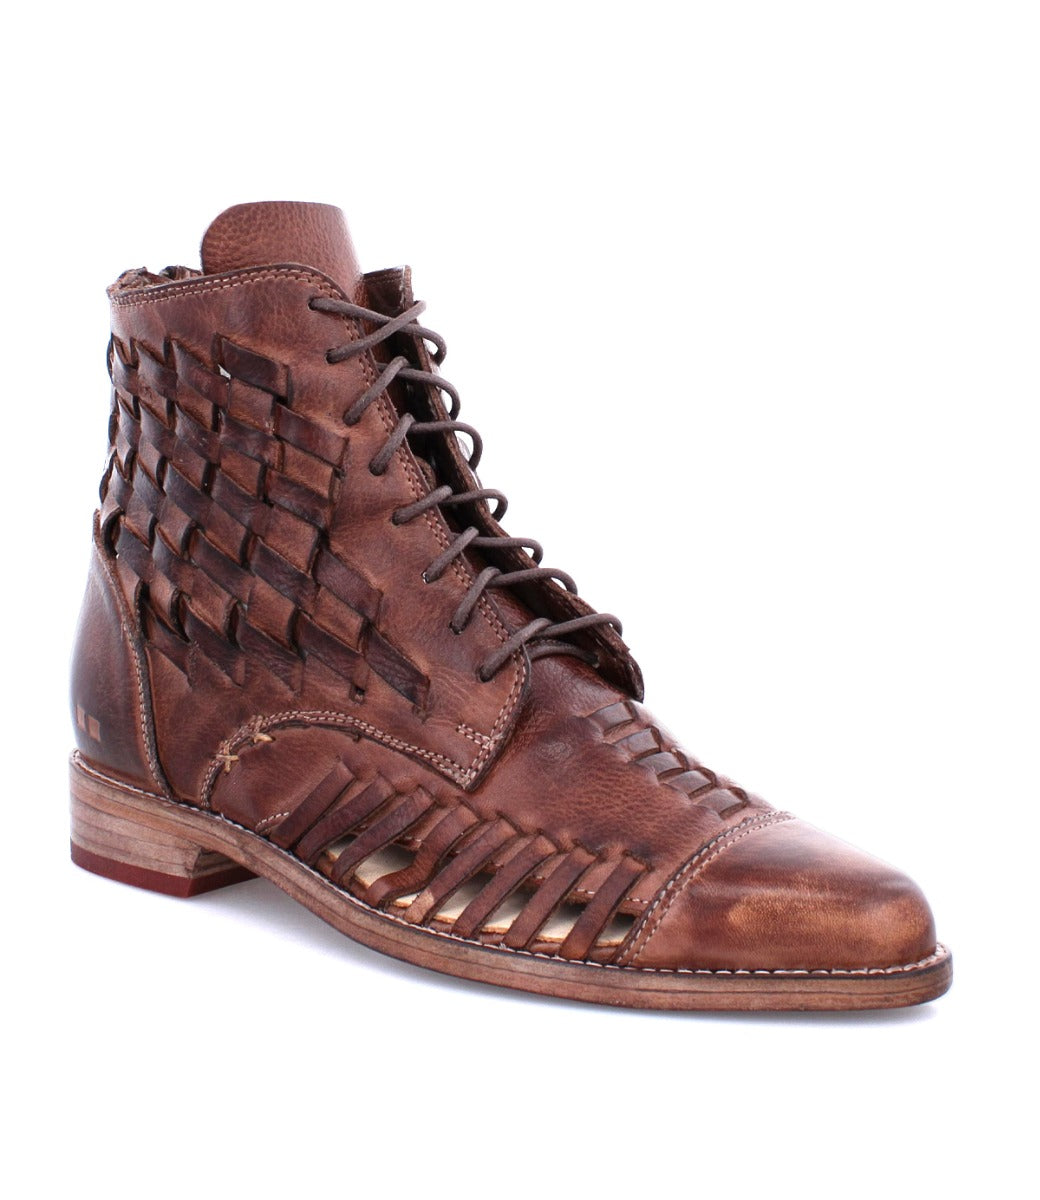 A brown leather boot with woven detailing, the Loretta by Bed Stu.